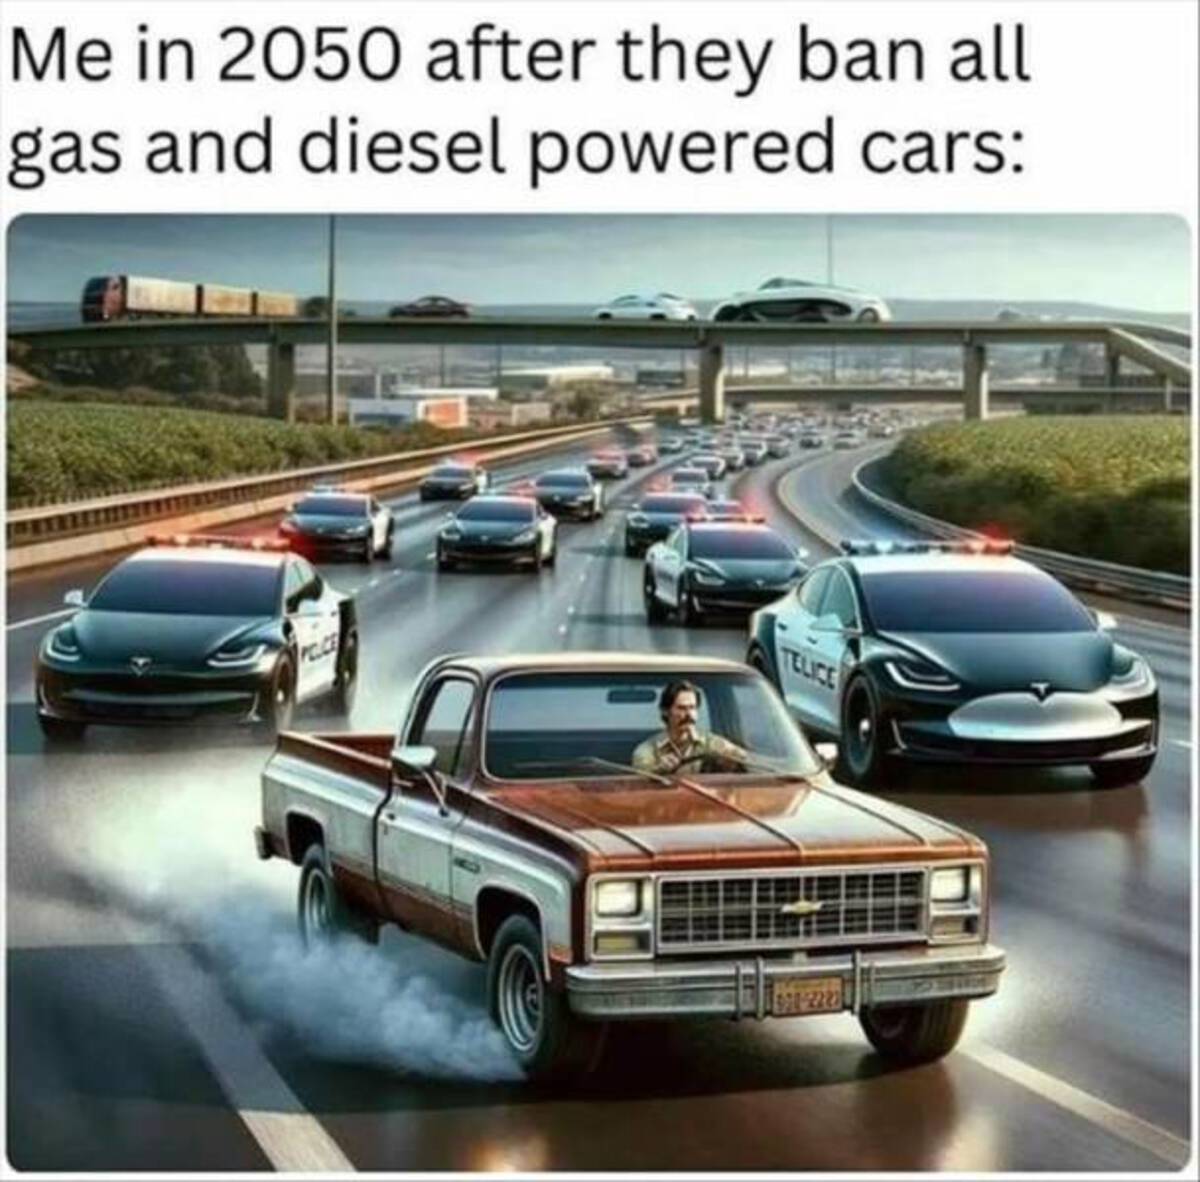 me in 2050 when they ban all gas and diesel cars meme - Me in 2050 after they ban all gas and diesel powered cars Telice